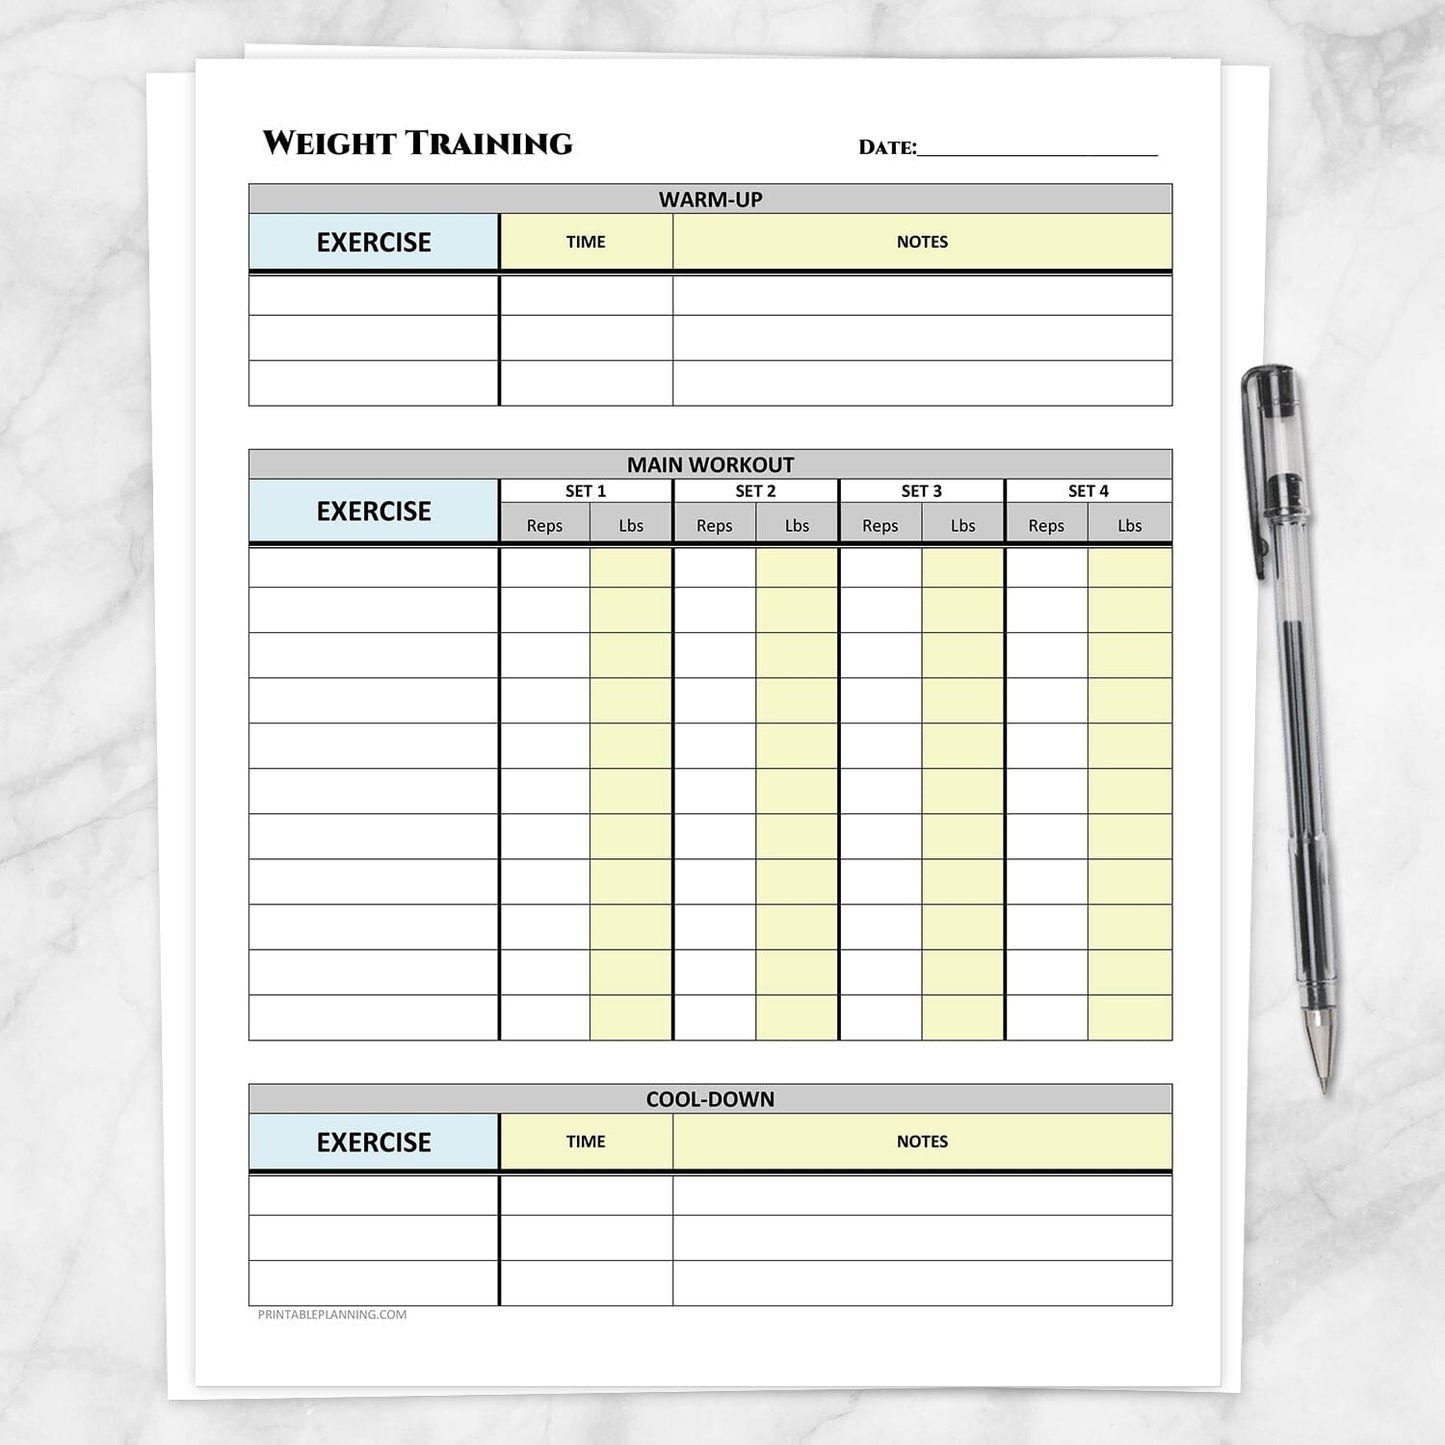 Printable Weight Training Daily Log with Warm-up and Cool-down at Printable Planning.